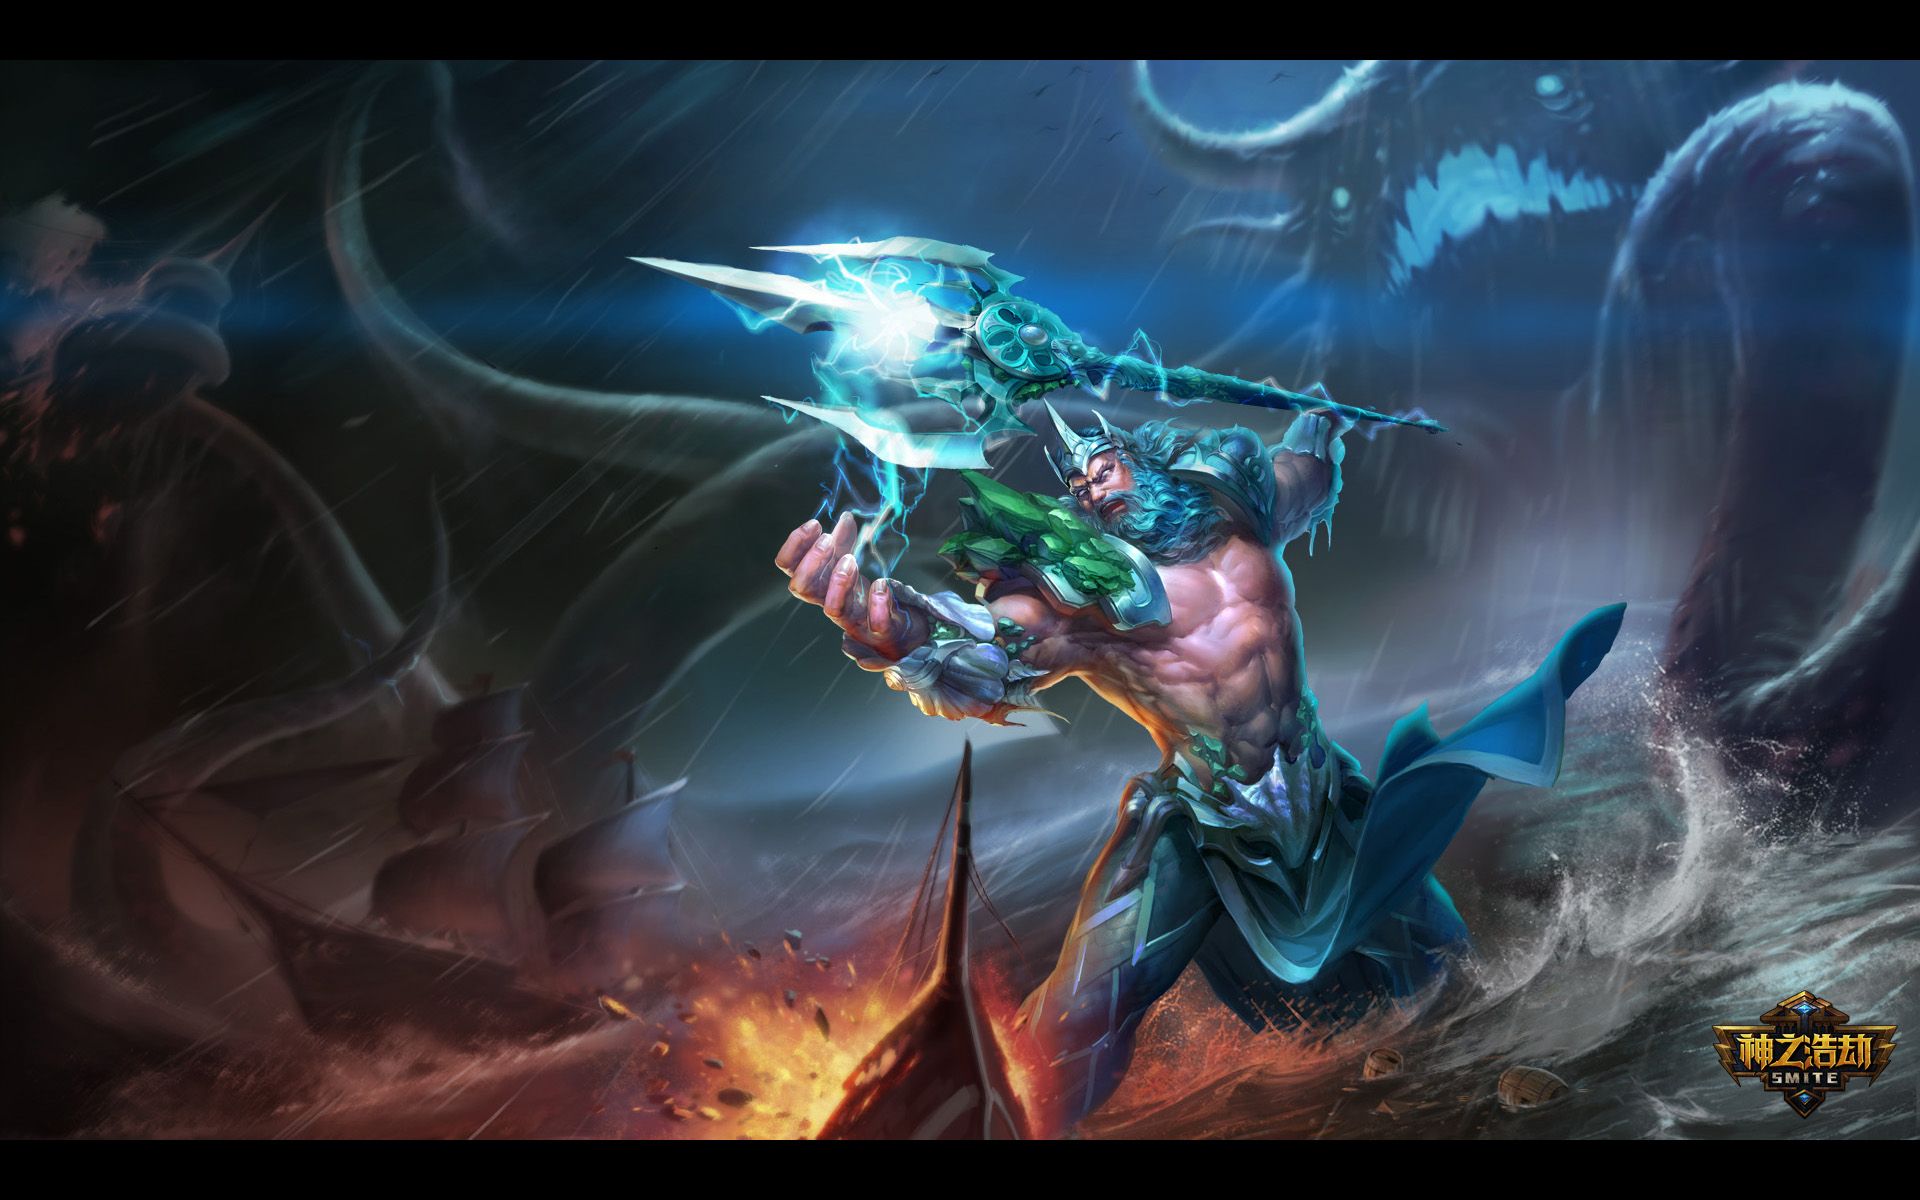 Why doesnt Hirez release official wallpapers for each God Smite